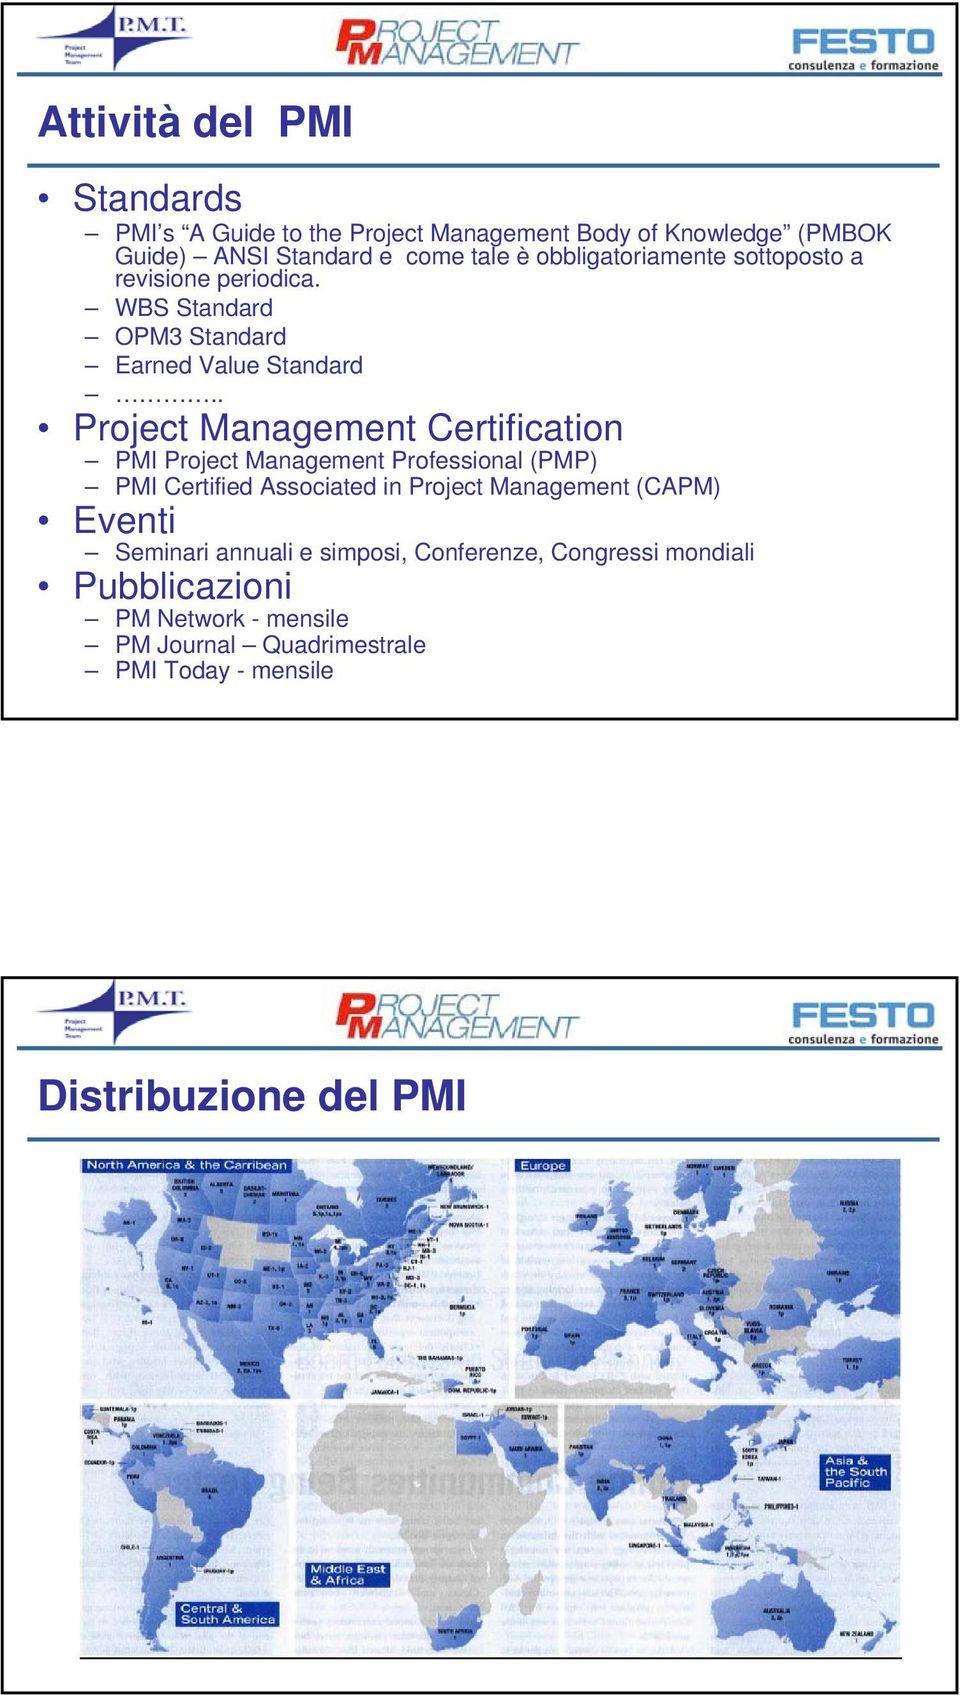 . Project Management Certification PMI Project Management Professional (PMP) PMI Certified Associated in Project Management (CAPM)